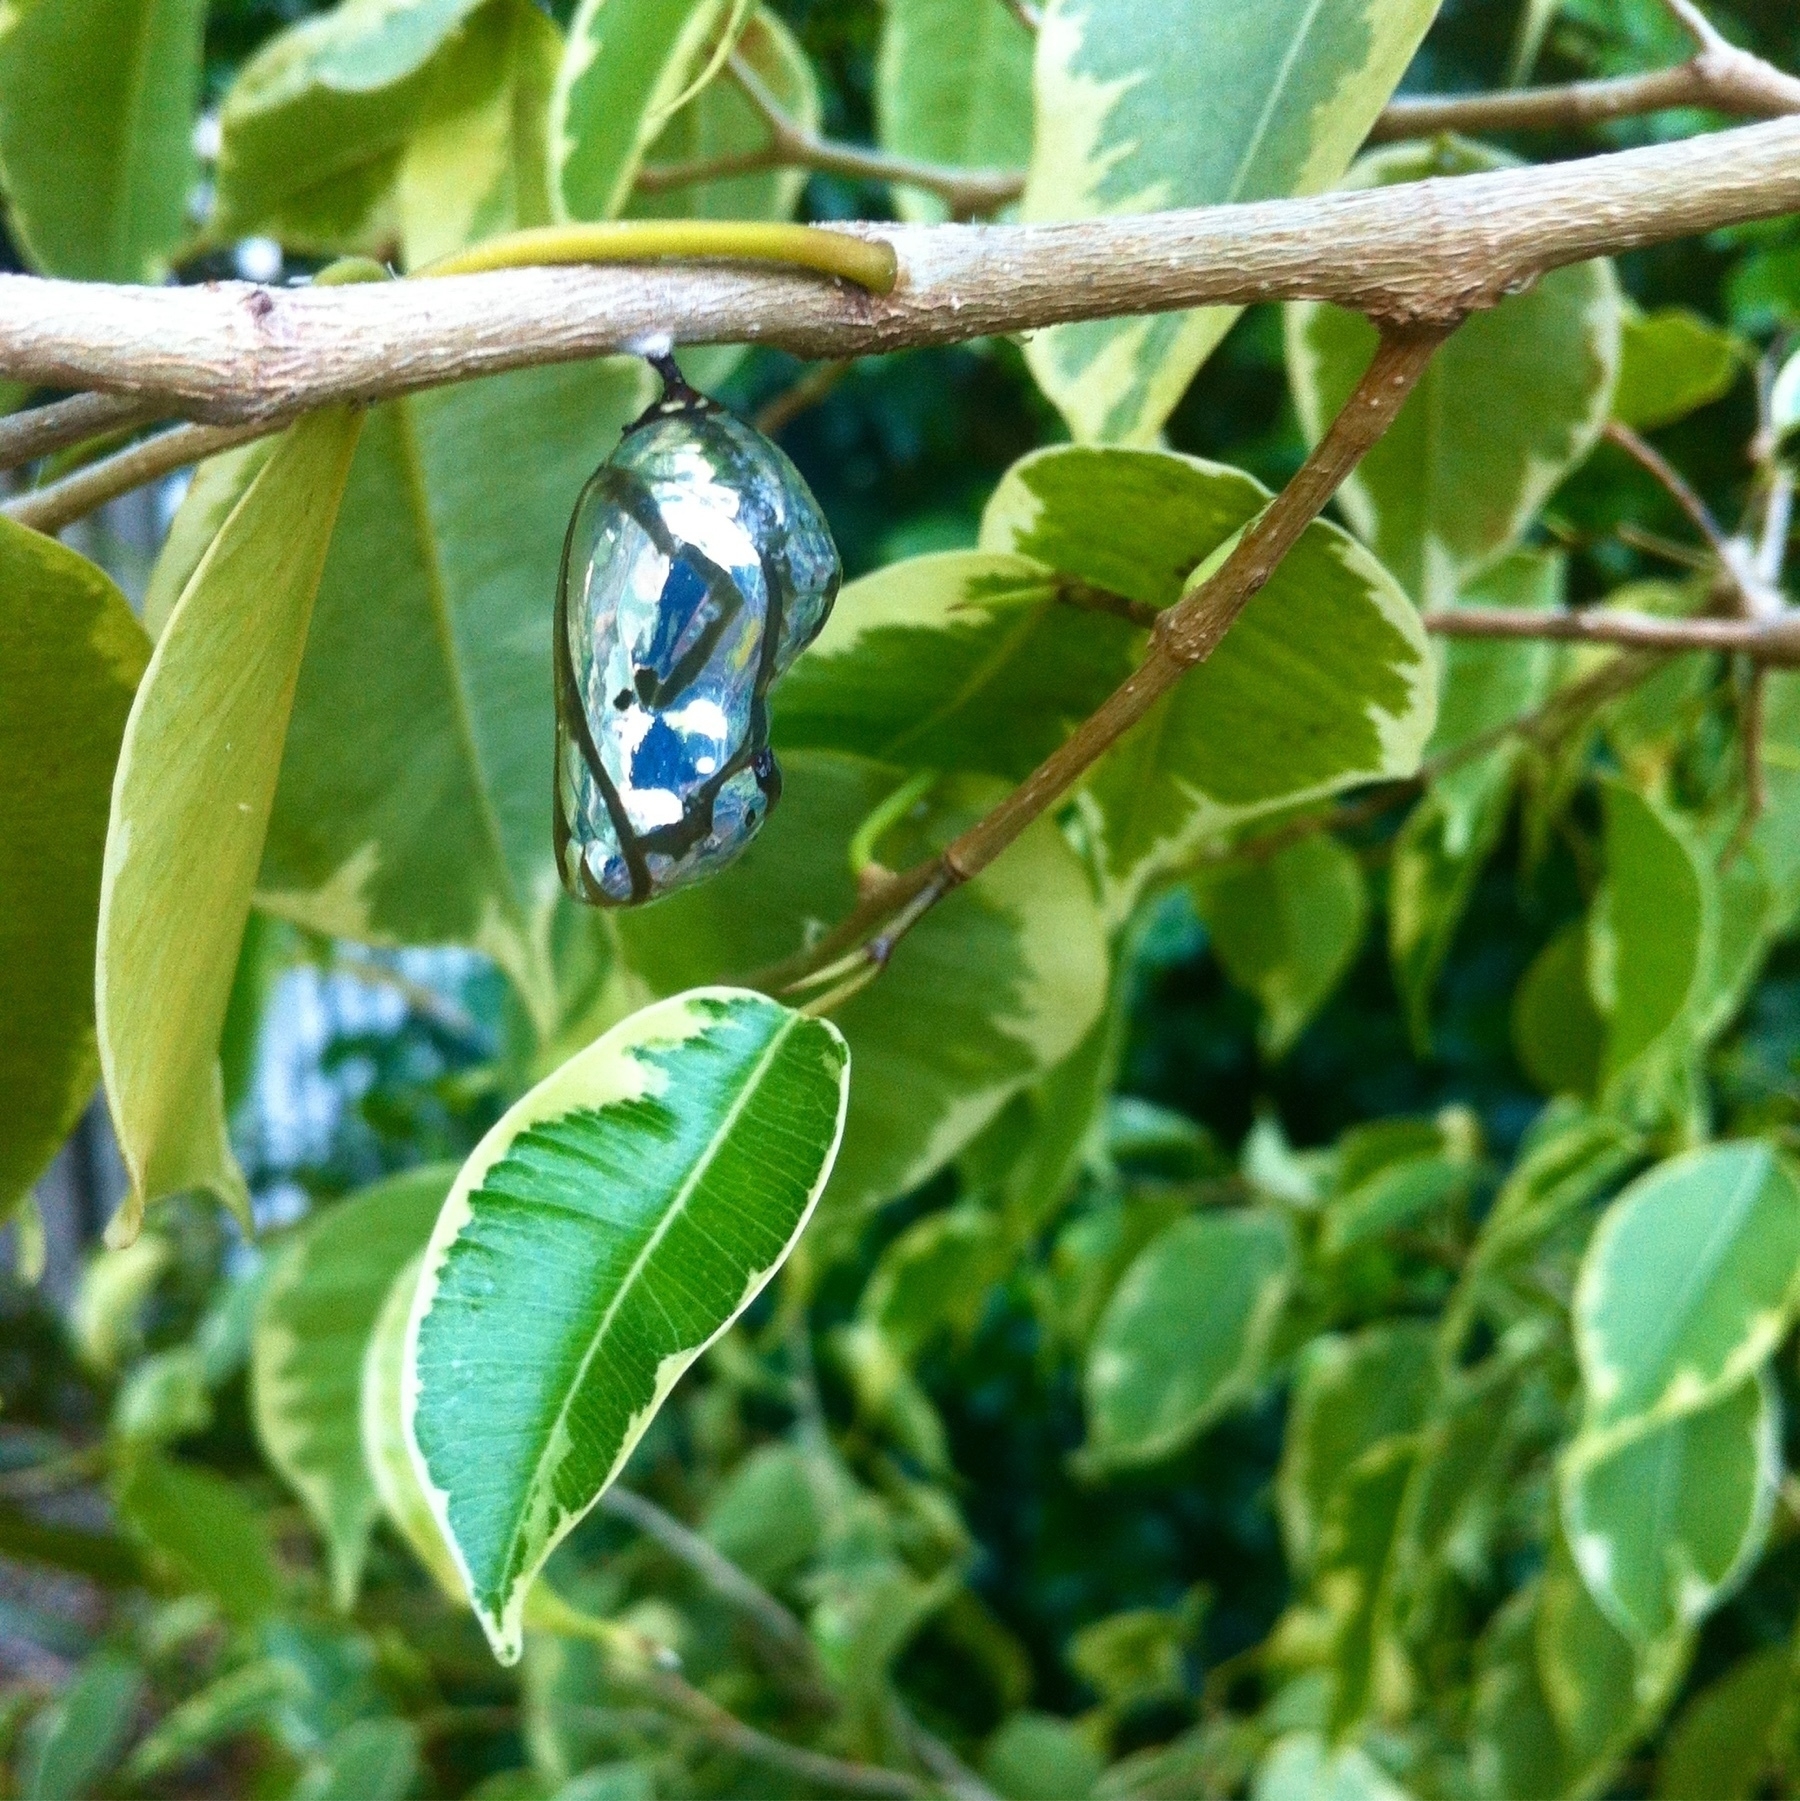 A silver blue cocoon hanging from a thin branch. The background is full of green leaves.